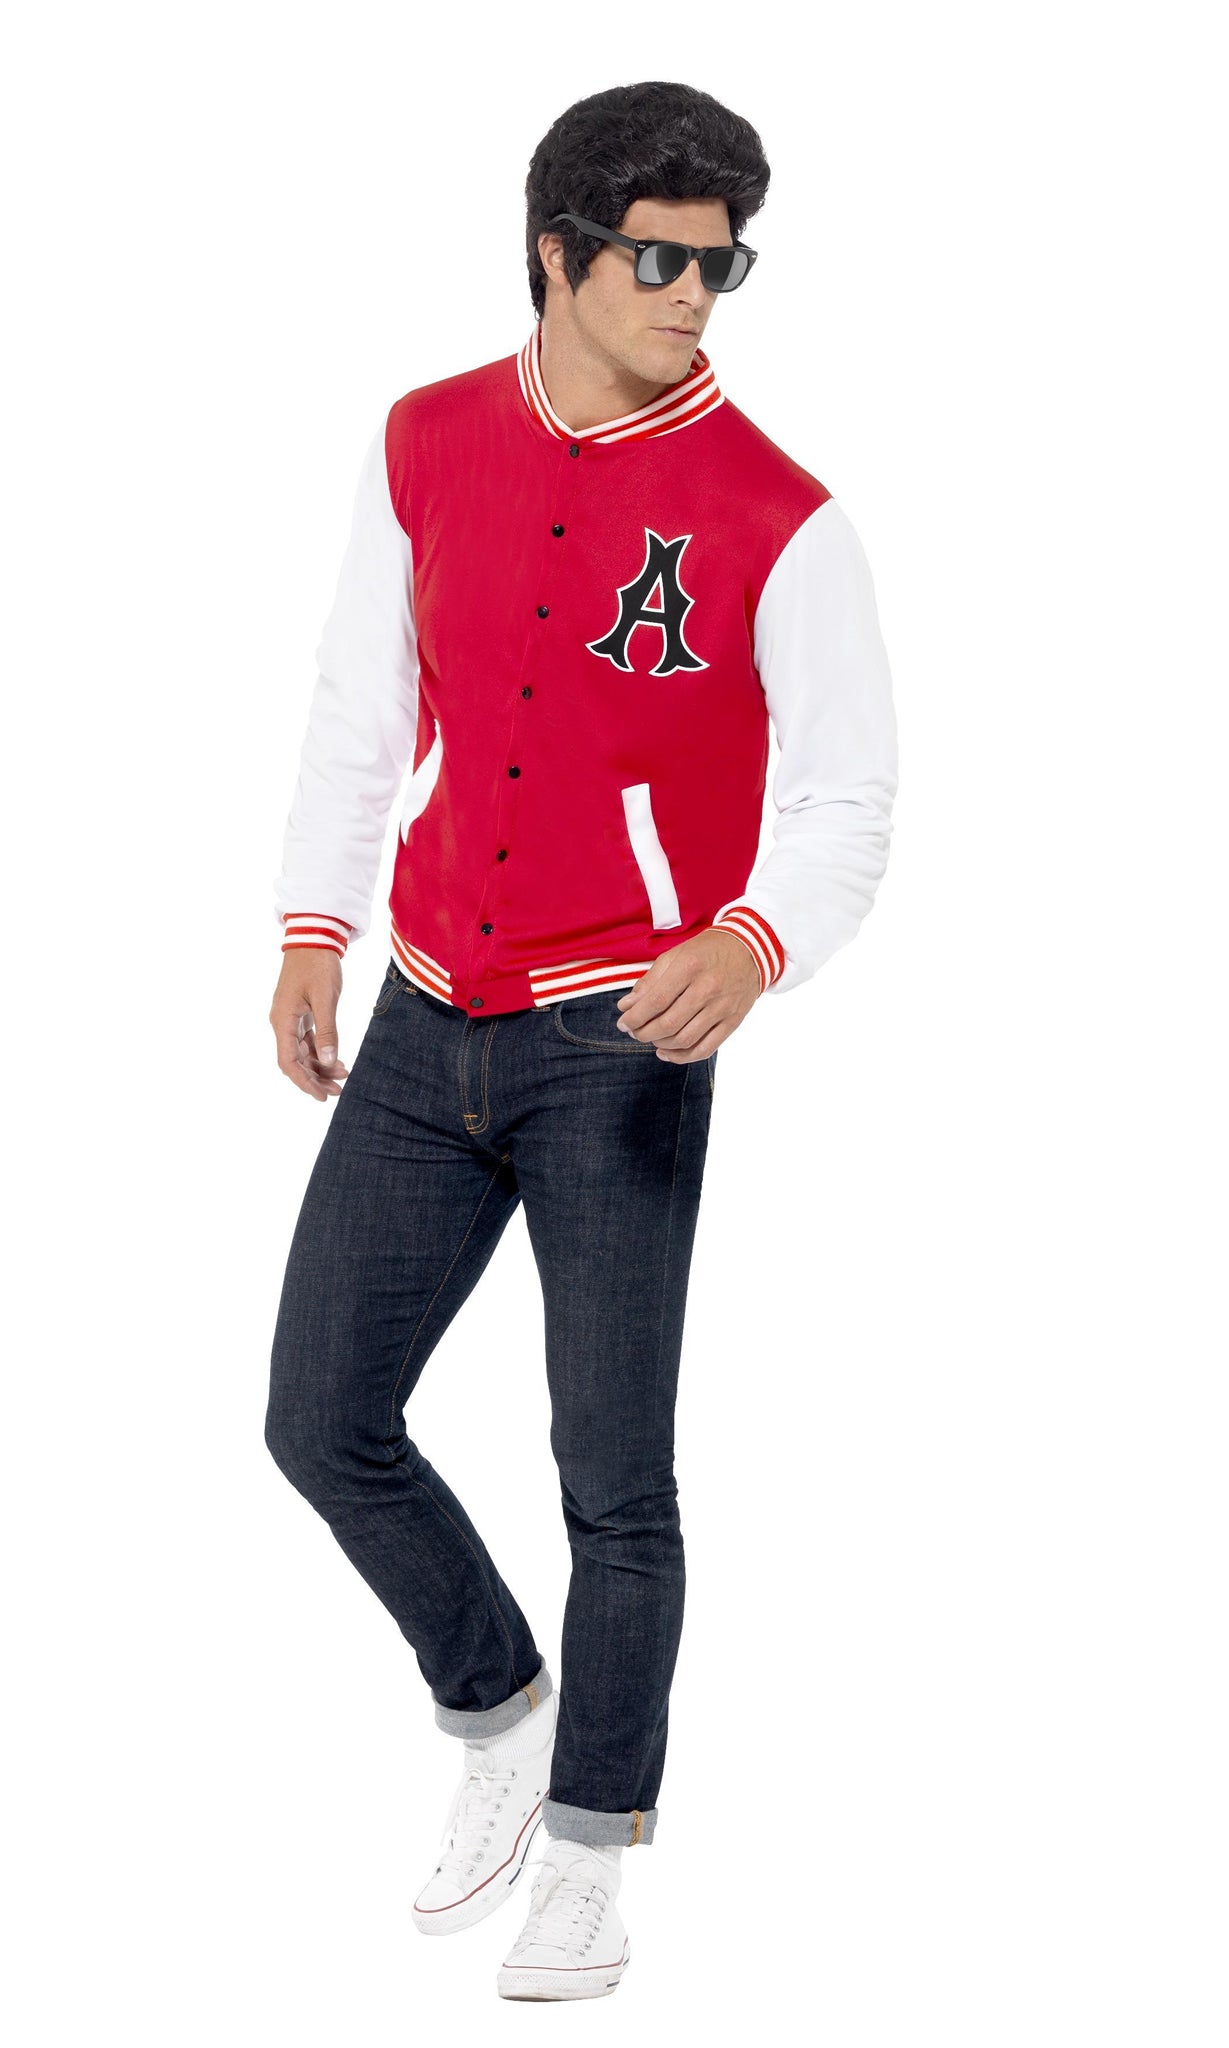 Red and white letterman college jacket